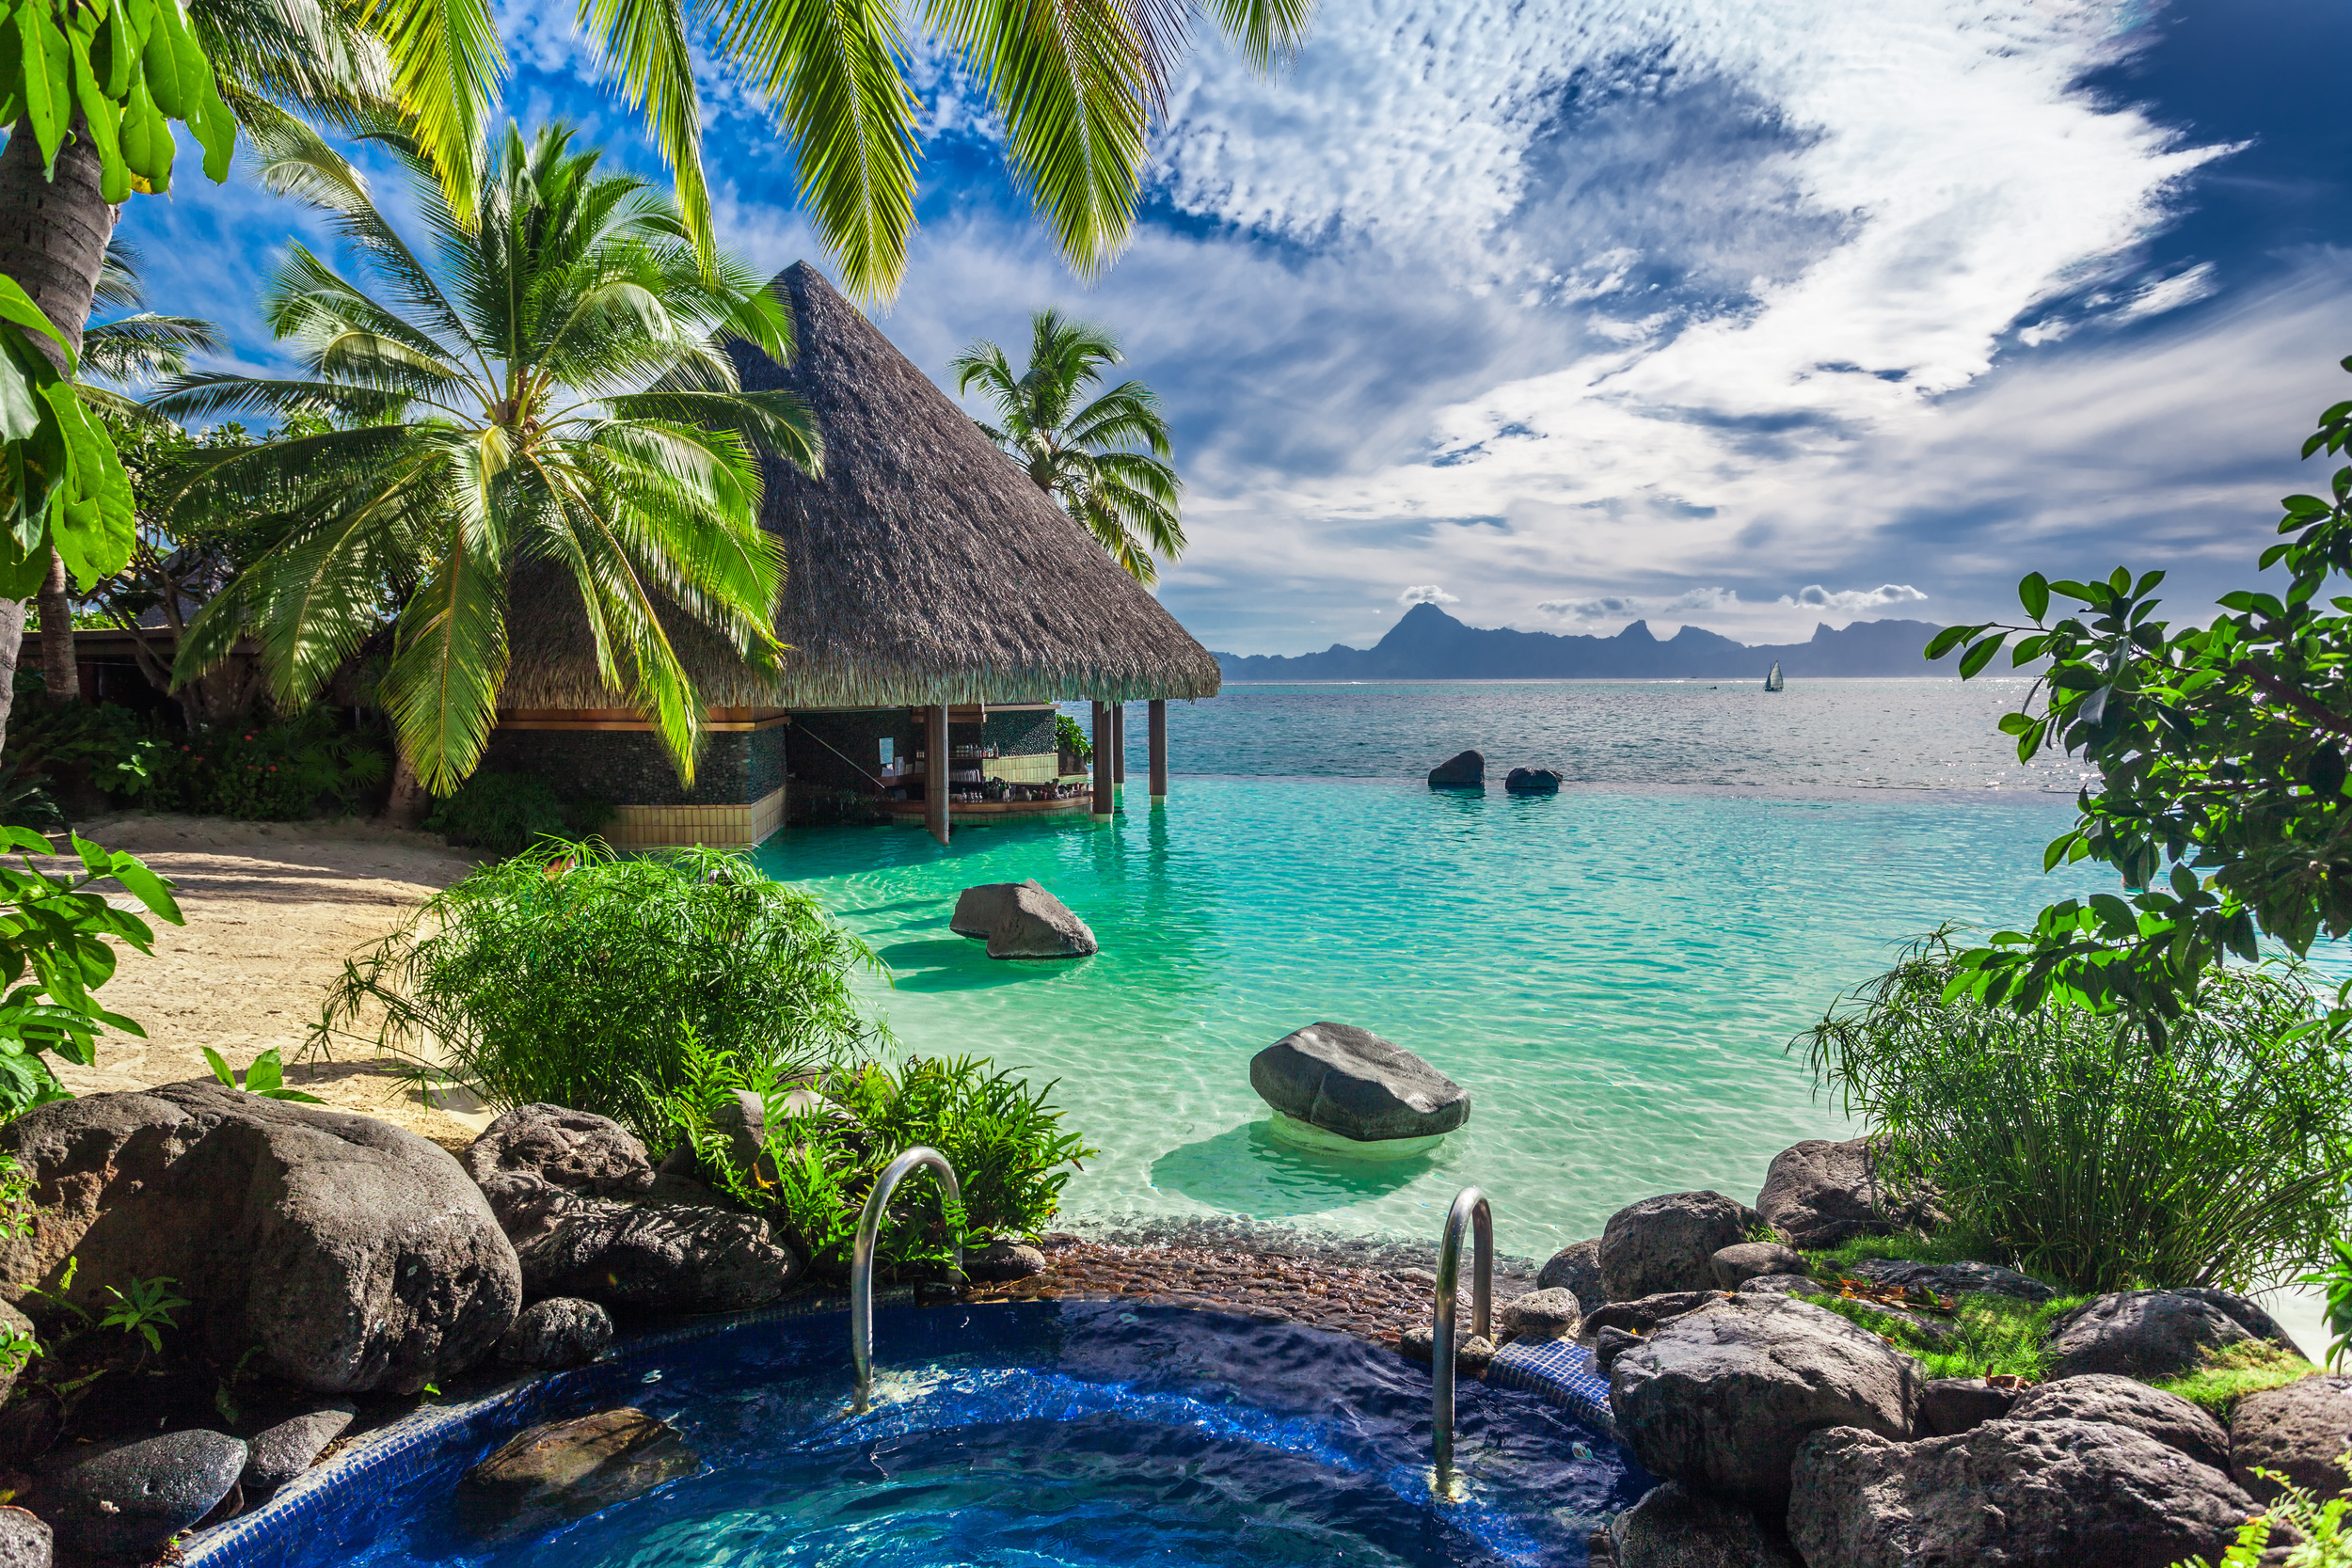 <p>Tahiti is one of the world's great tropical locations. A playground for adventure seekers and a spa for nature lovers, the island is a destination for anyone who enjoys turquoise waters, soothing beaches, and incredibly lush jungles. You won't find any parties here, nor skyscrapers, just the serene sounds of nature. </p><p>There are enough natural activities to fill an entire calendar—and enough coconuts to feed an entire country. Beware of the fruit here; you can eat too much of it. So, what are the best things to do while exploring the island? We've rounded up the best Tahitian experiences, from the black sands to the choral reefs to the nearby islands, which offer their own slice of tropical paradise. Here is how you can visit Tahiti in style.</p>